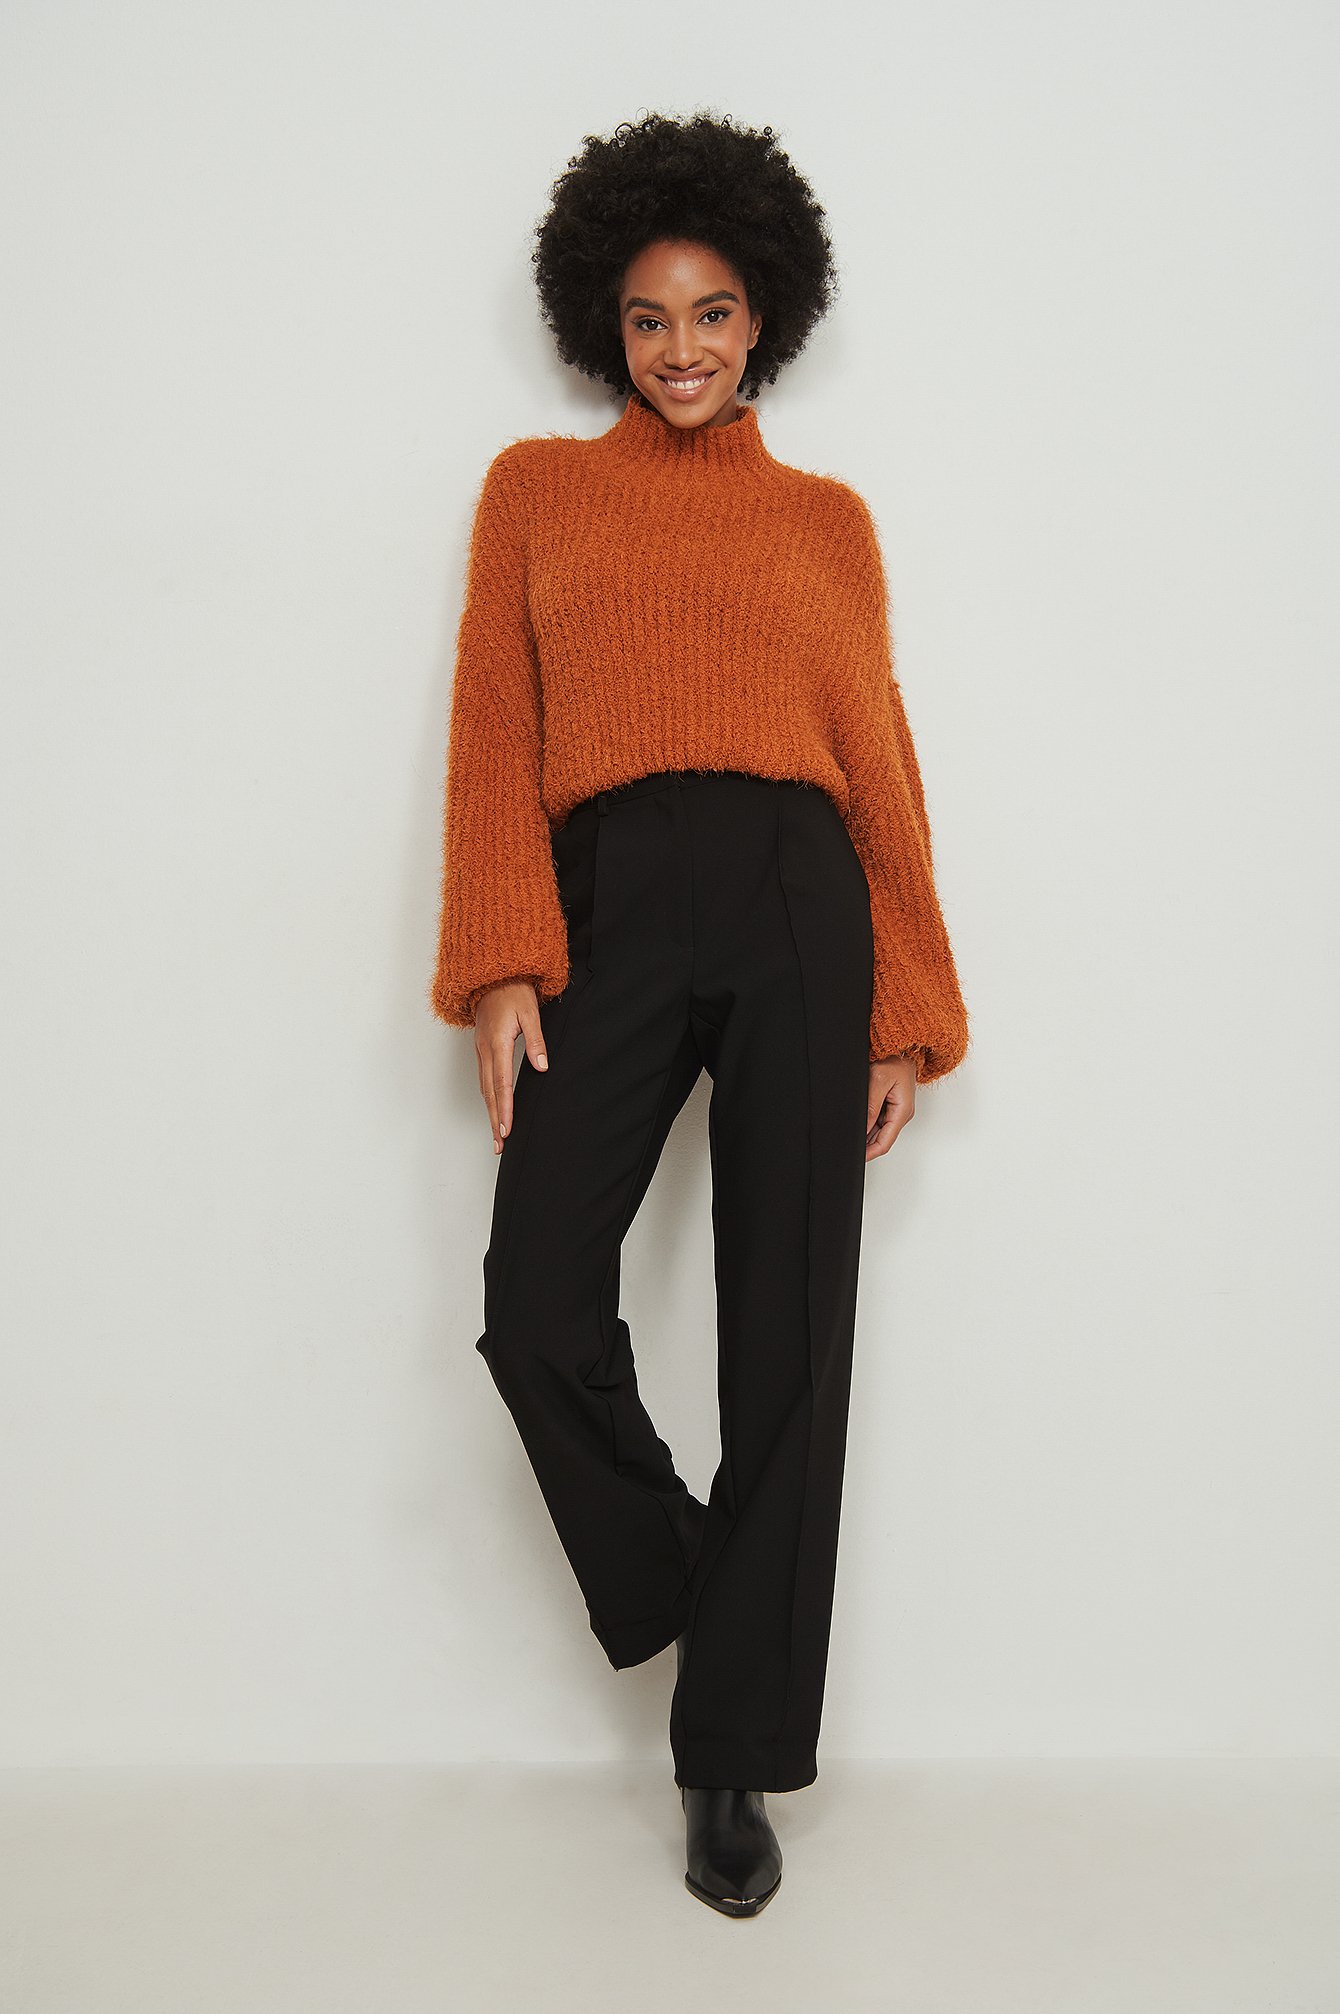 Fluffy Knitted Turtleneck Sweater Outfit.